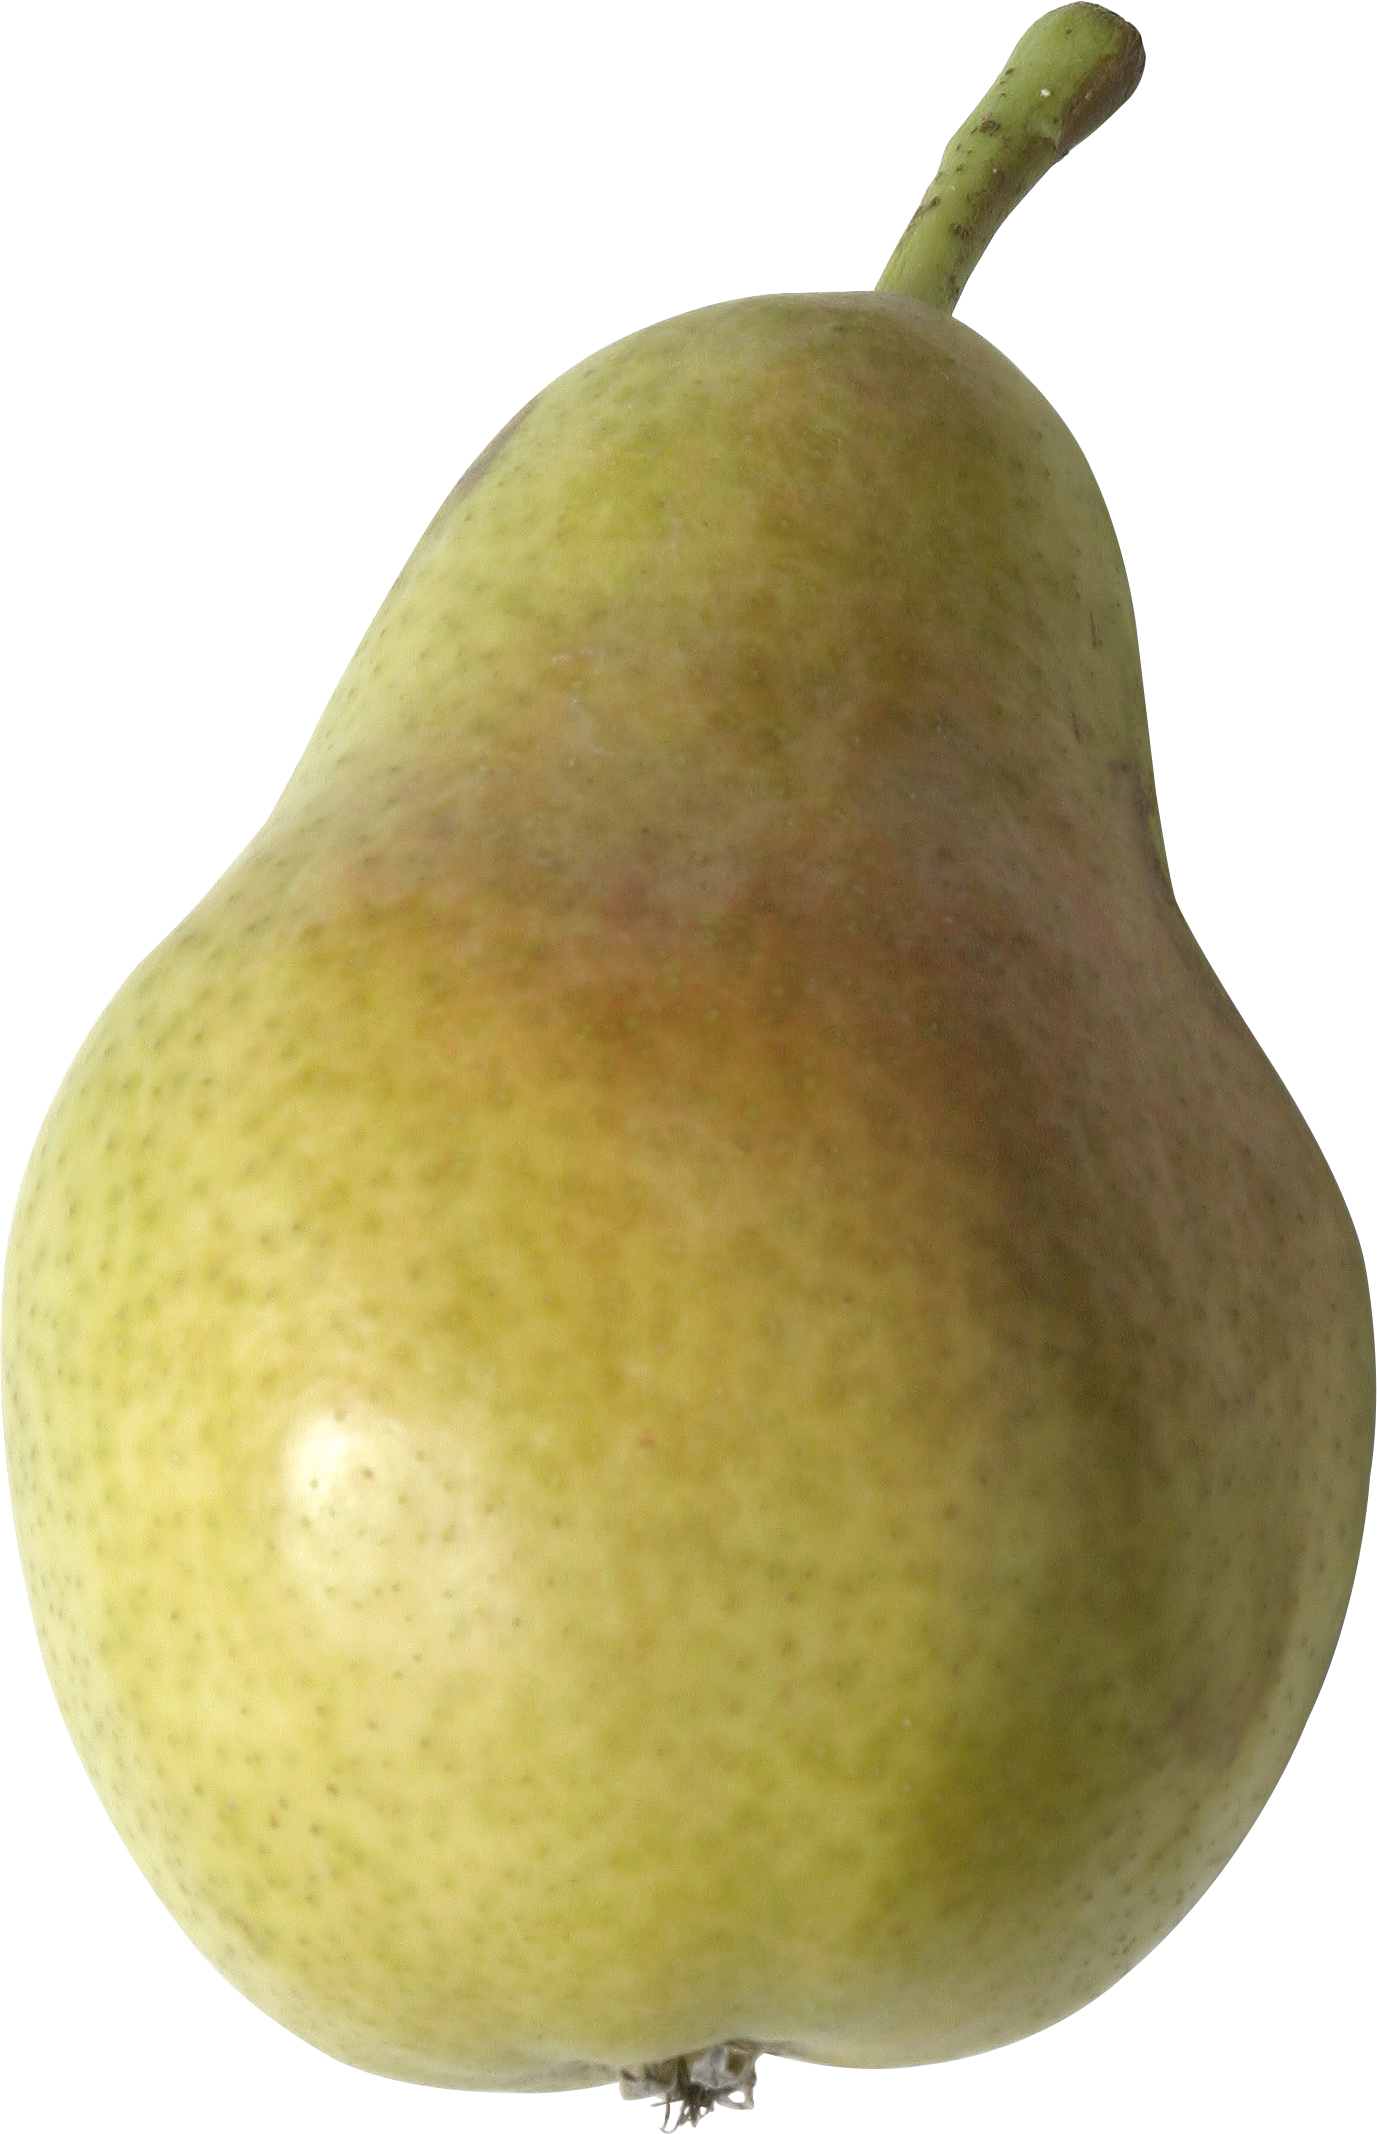 Green Organic Pears Free Download PNG HD PNG Image